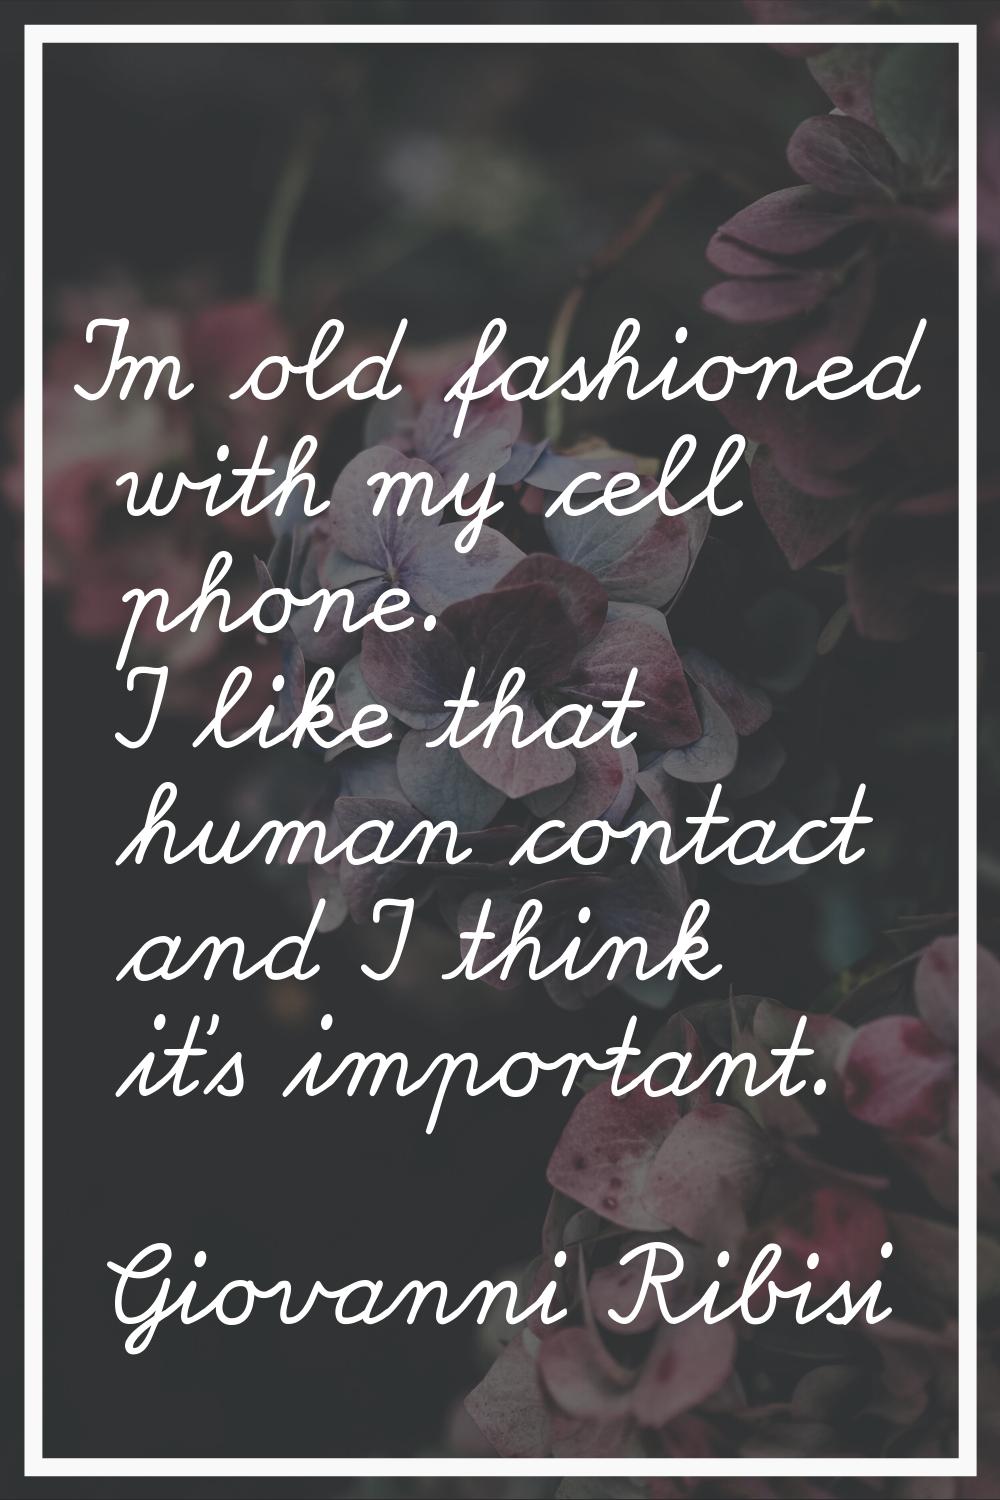 I'm old fashioned with my cell phone. I like that human contact and I think it's important.